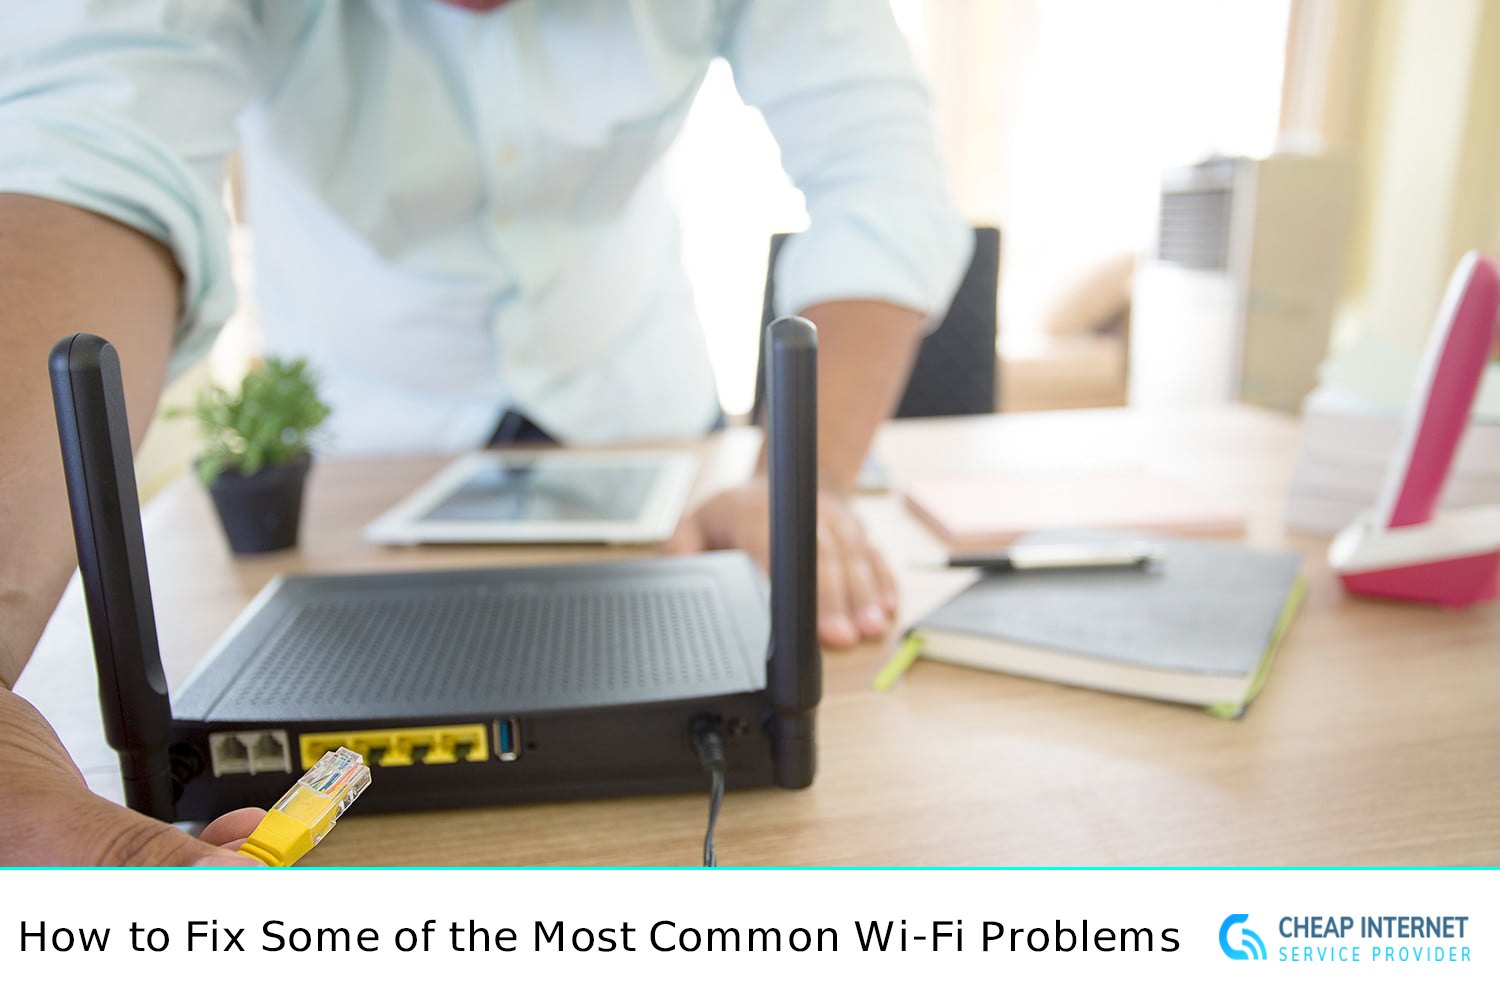 How to Fix Some of the Most Common Wi-Fi Problems